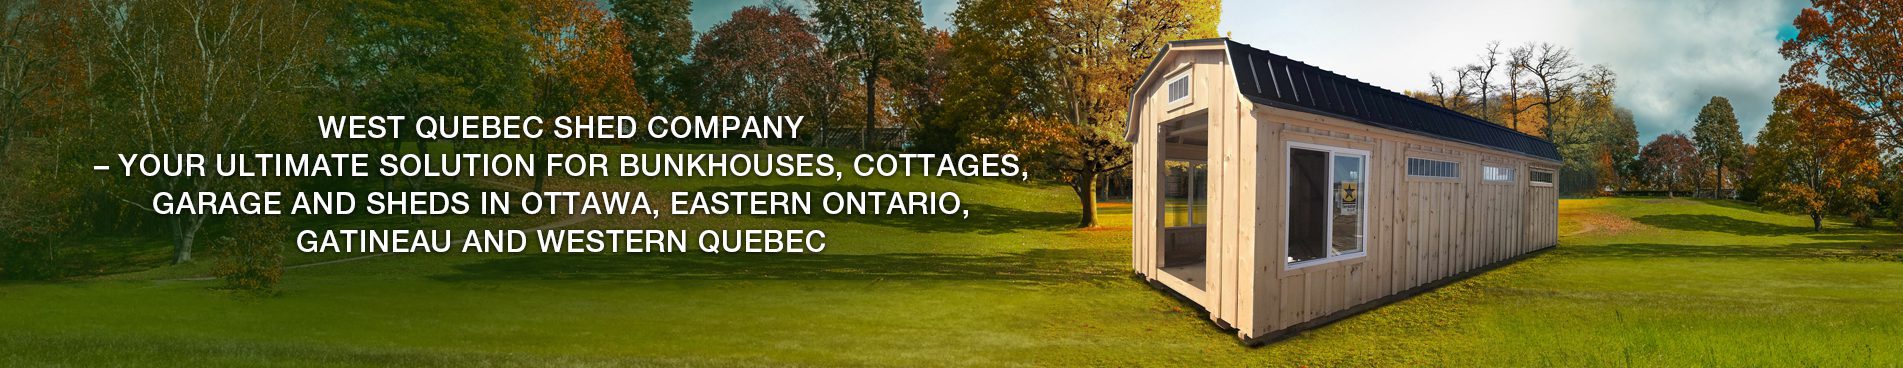 West Quebec Shed Company - Your Ultimate Solution for Bunkhouses, Cottages, Garage and Sheds in Ottawa, Eastern Ontario, Gatineau and Western Quebec